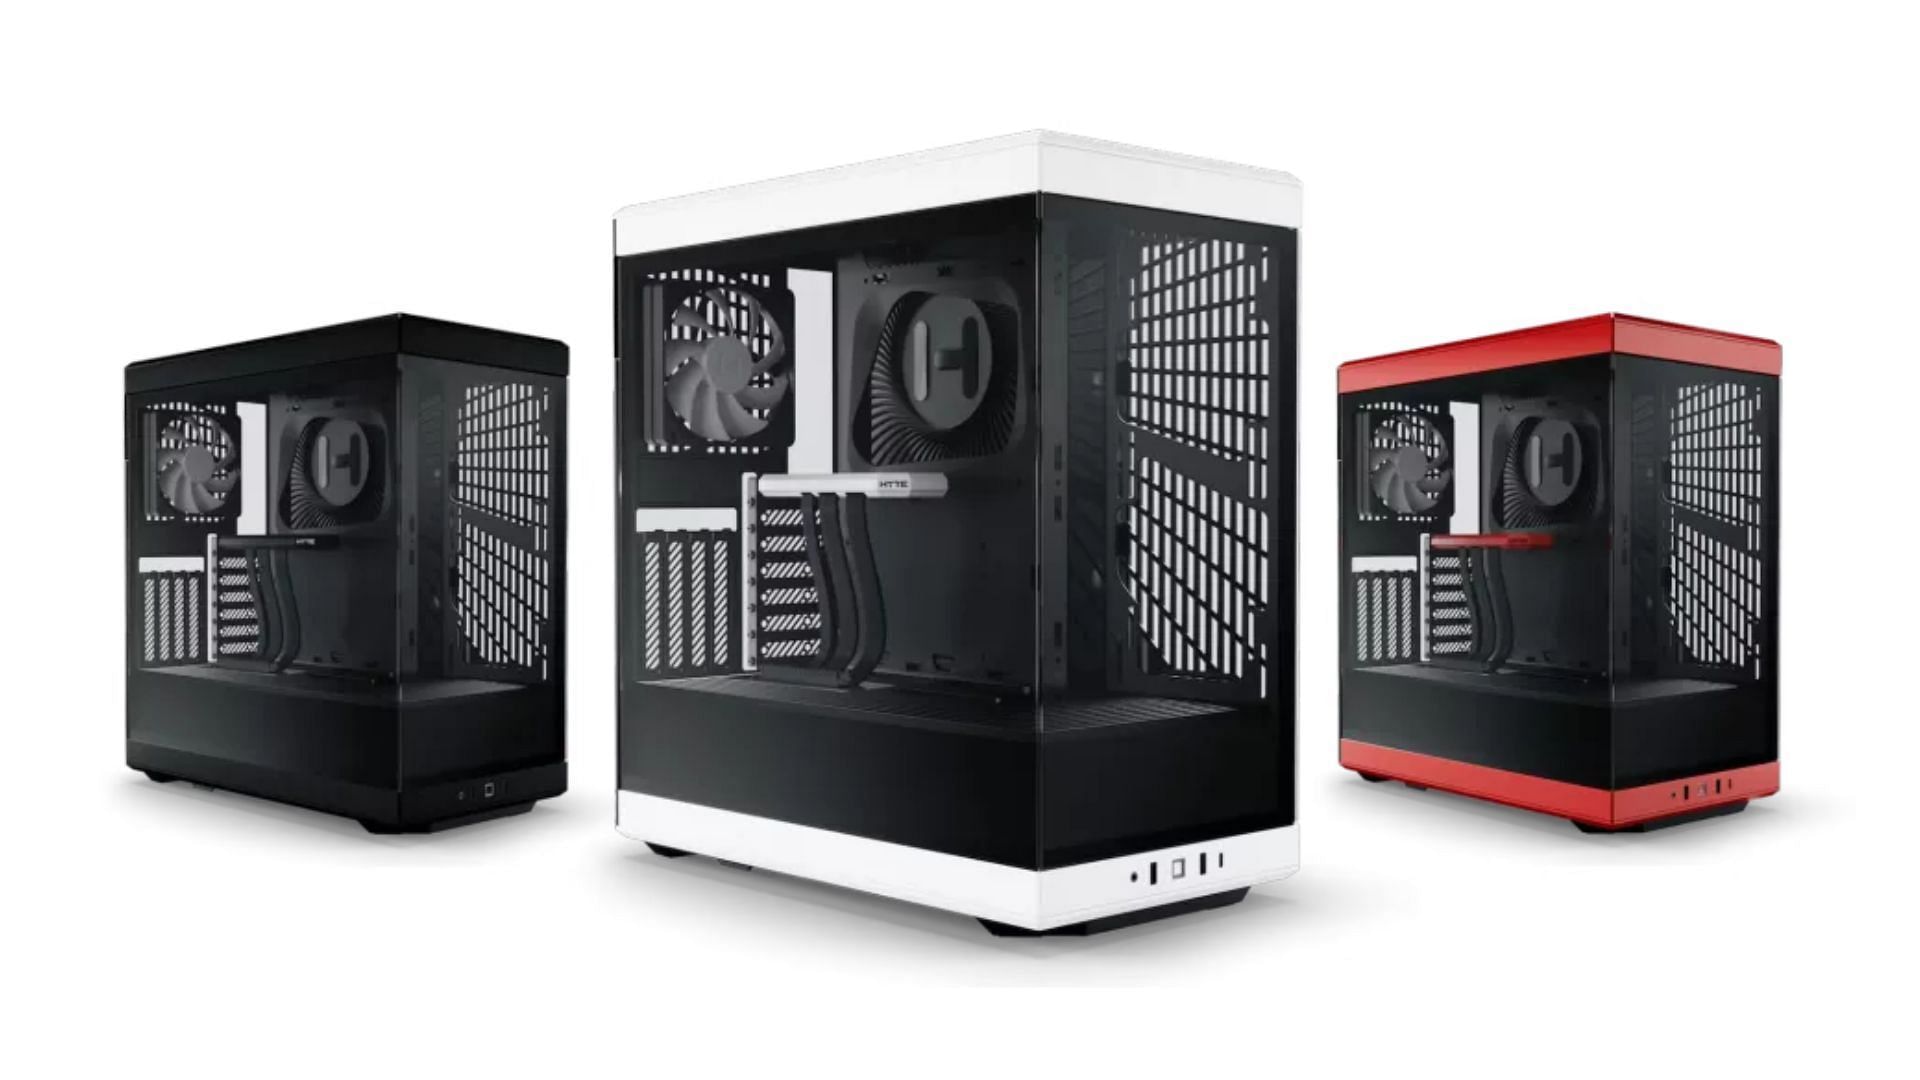 The Hyte Y40 is a stylish computer case (Image via Hyte)